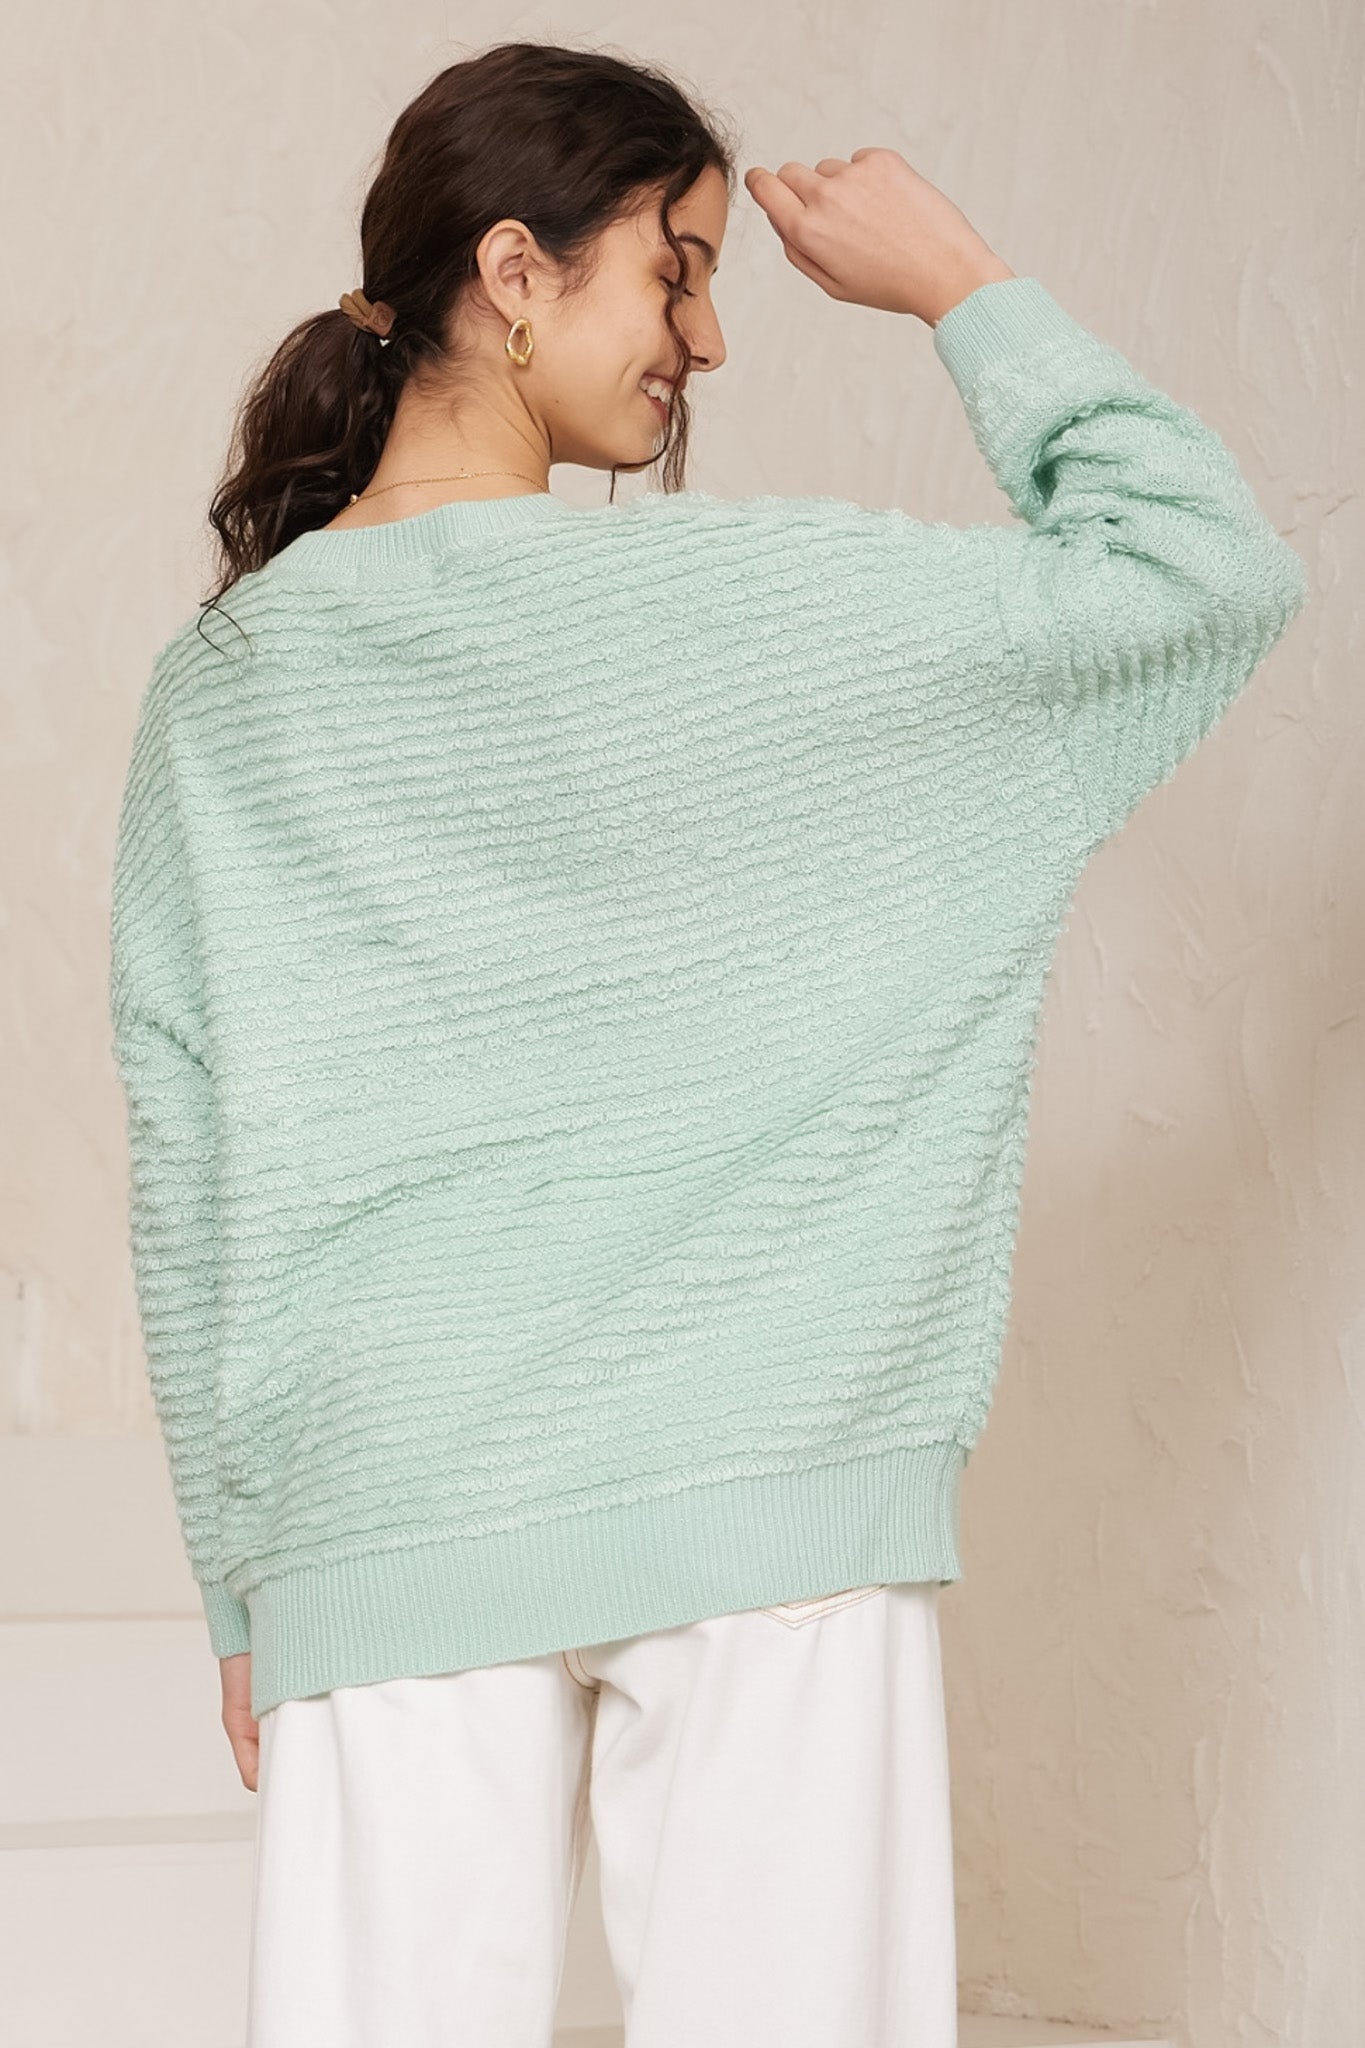 Nicole Jumper - Relaxed Textured Stripe Pull Over Jumper in Mint